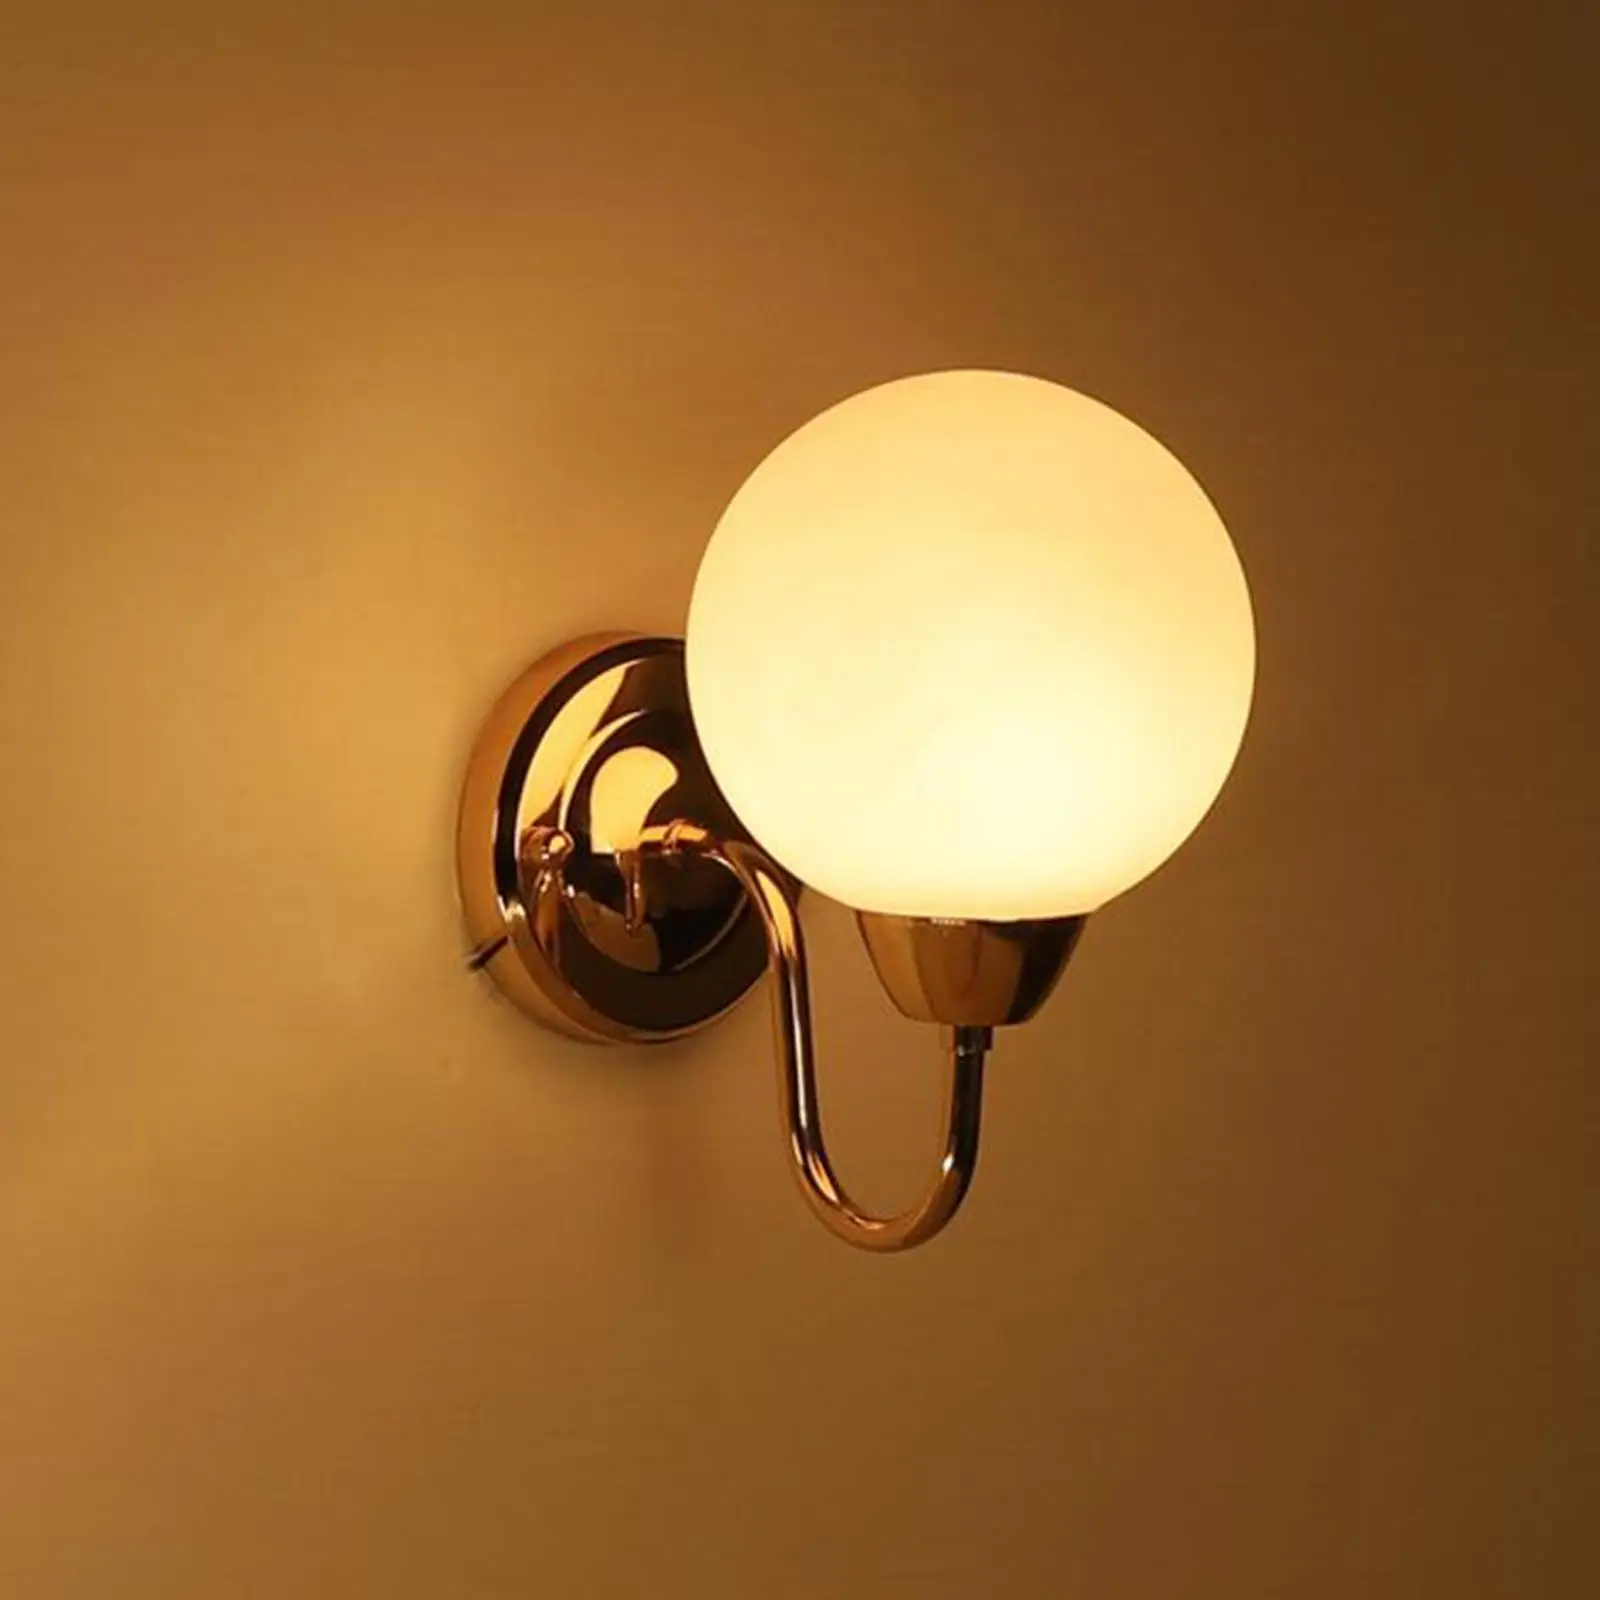 Home Simple Wall Sconce E27 Hallway Entryway Bedroom Wall Lamps Decor